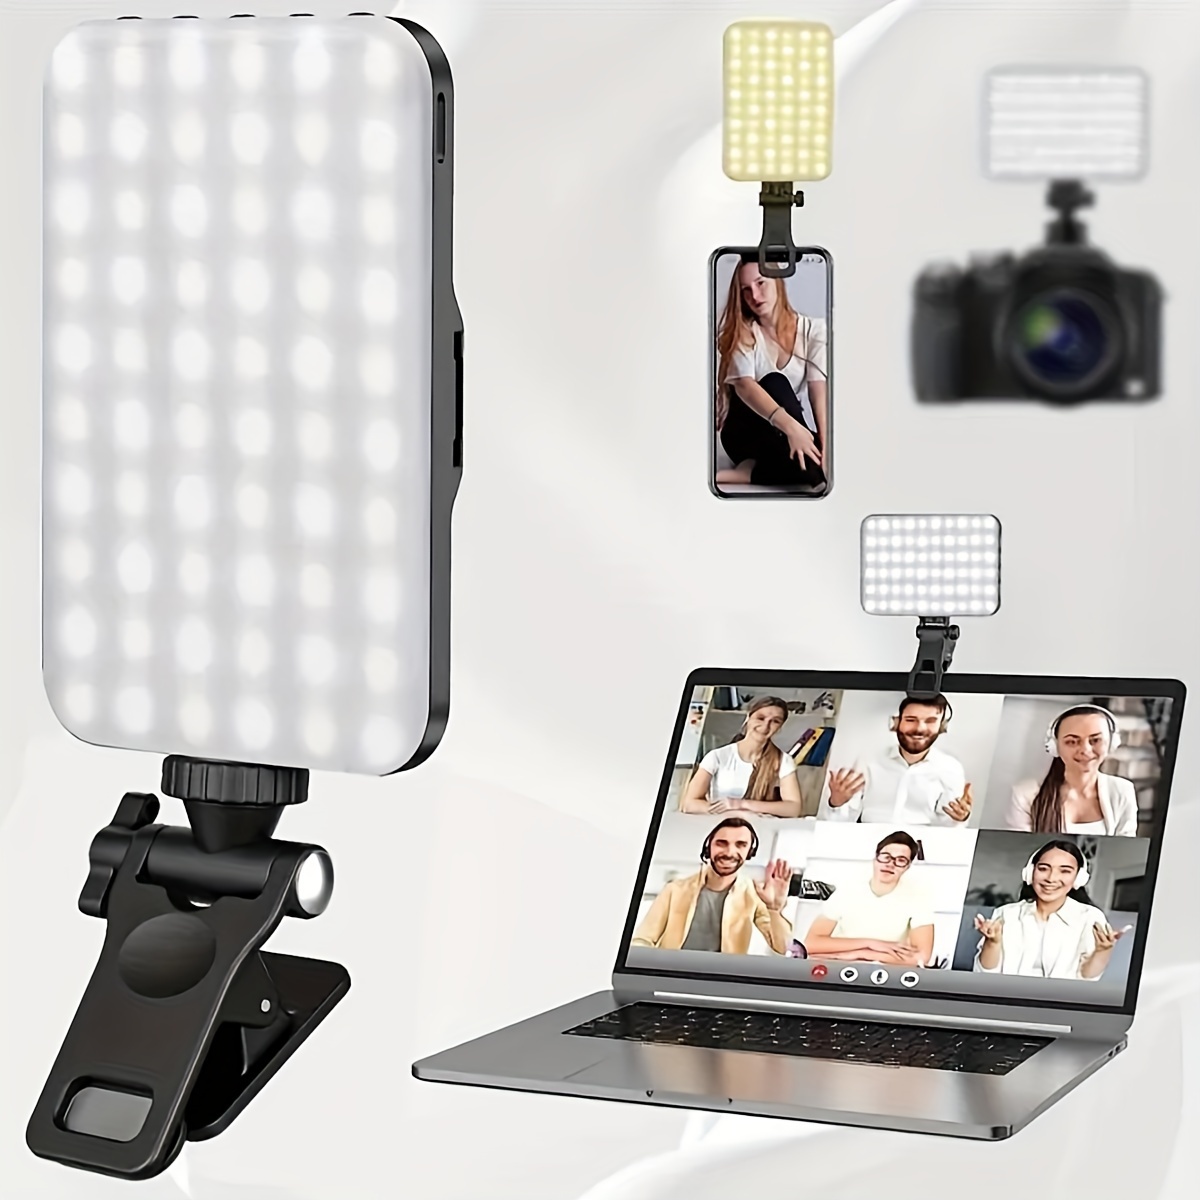 

Selfie Light & Phone Light Clip For Iphone - Phone Led Light With Adjustable Brightness, Perfect For Selfies, Makeup, For Live Streaming & Video Conferencing